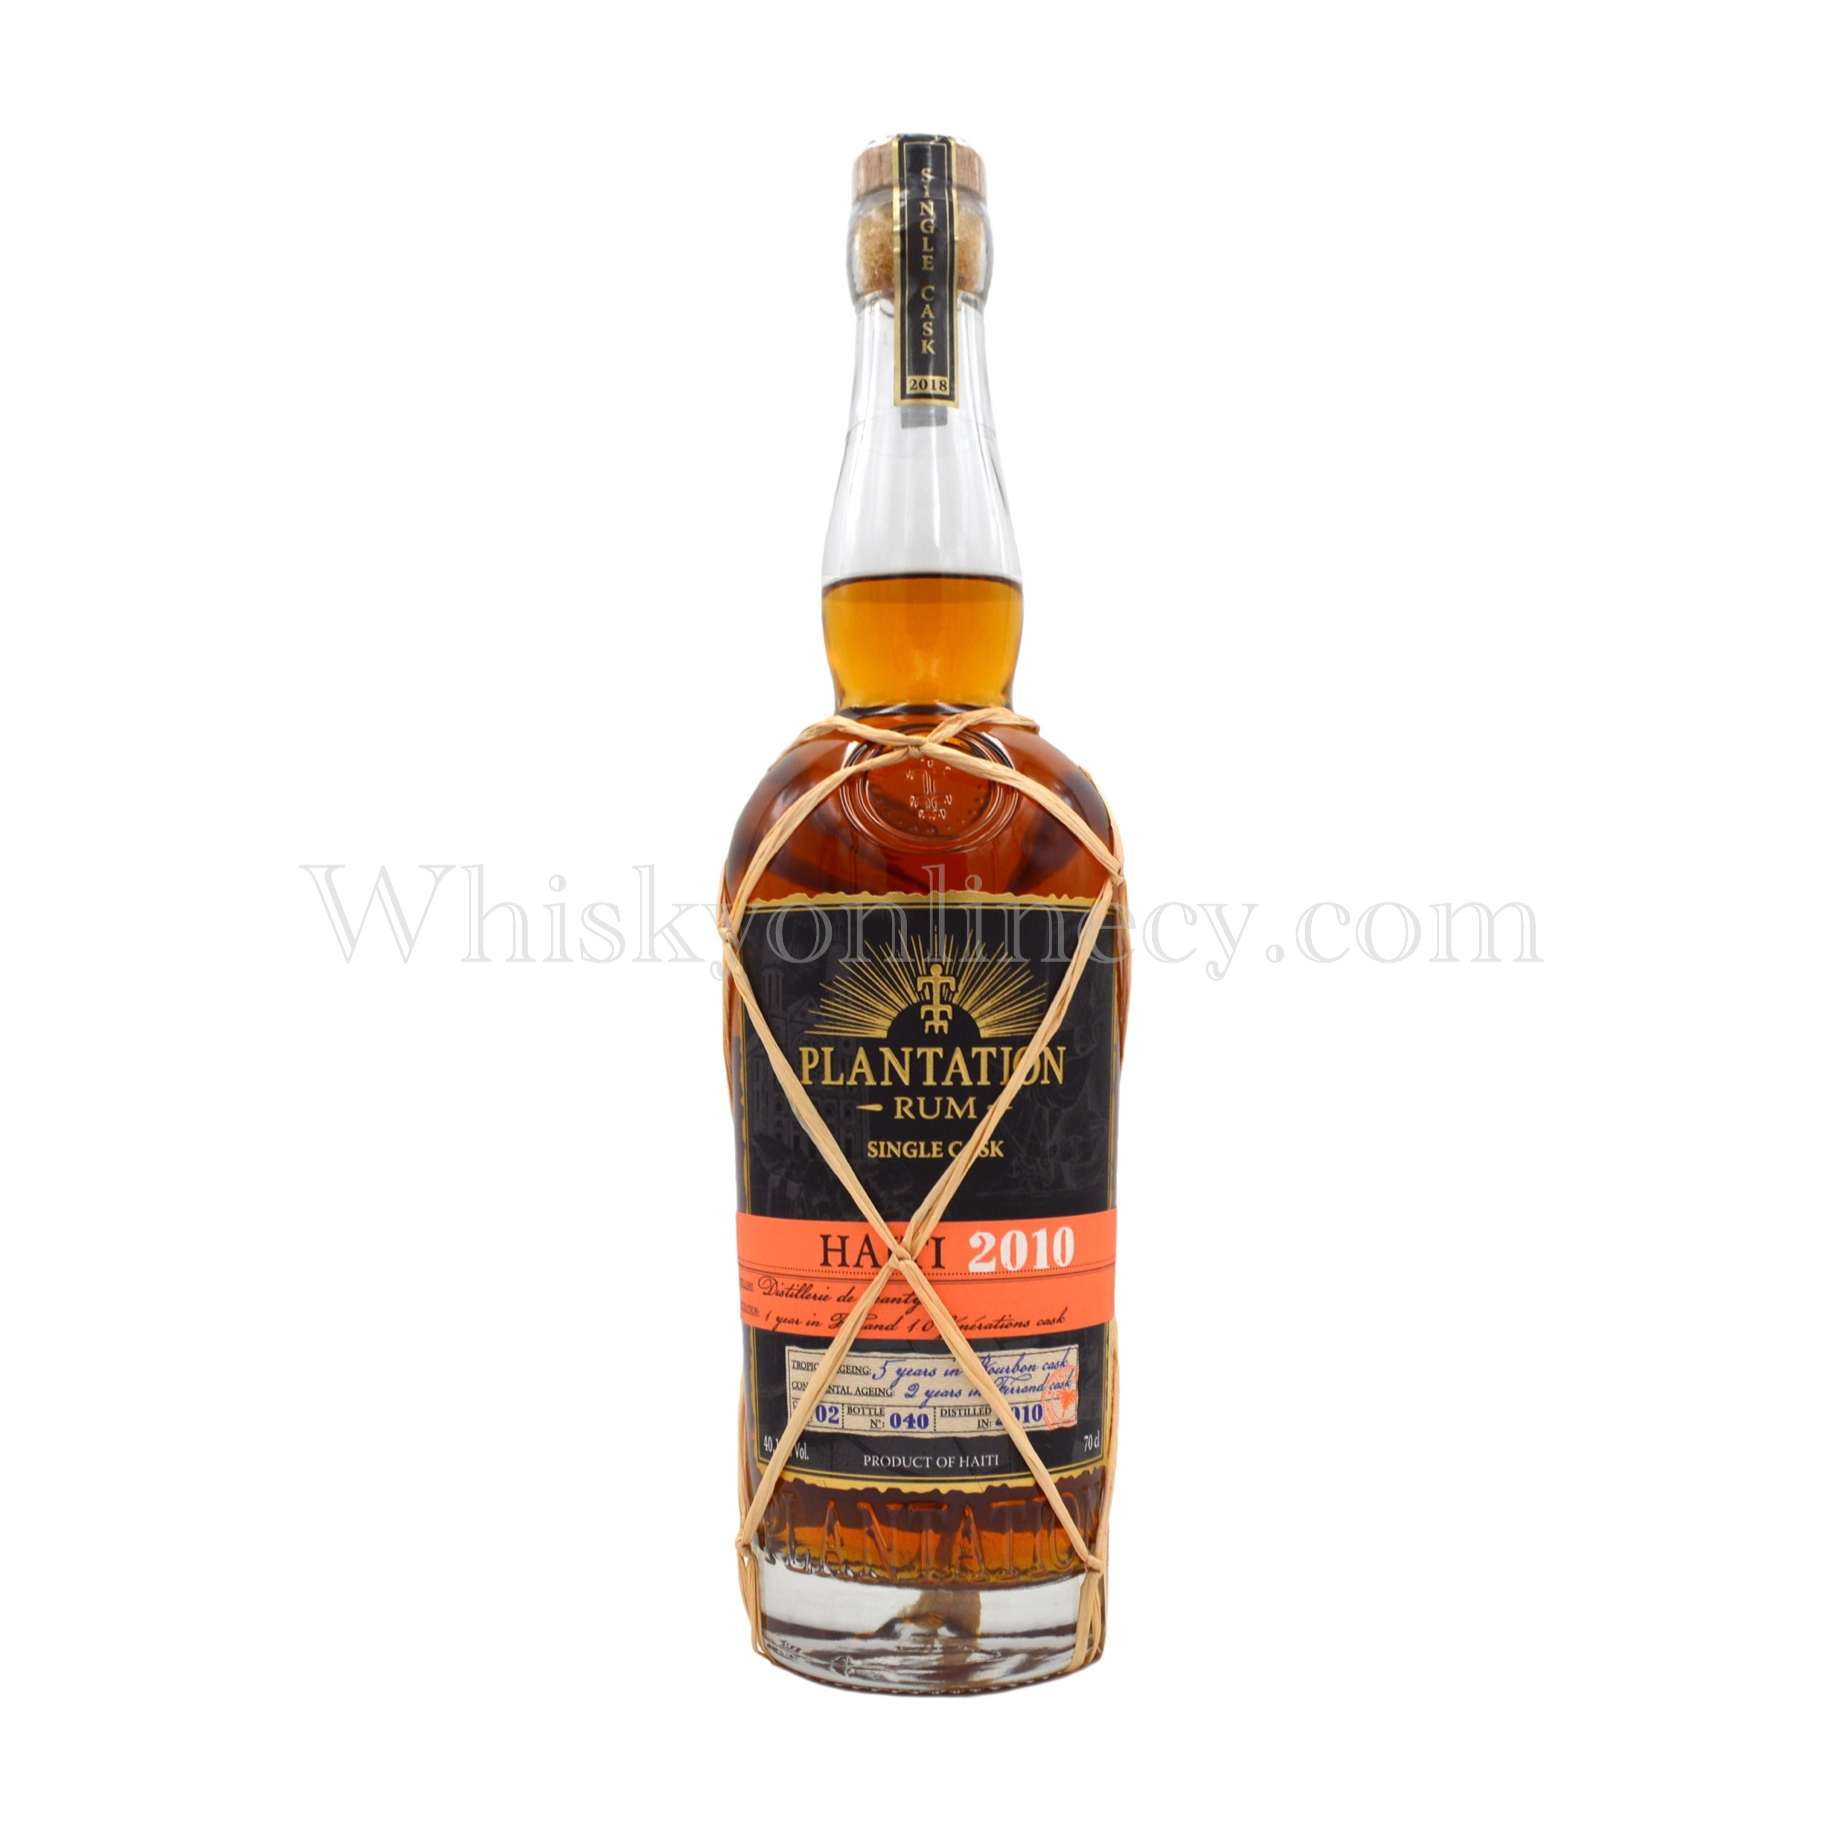 Online Archives 6 8 - Whisky - Page Rum Cyprus of